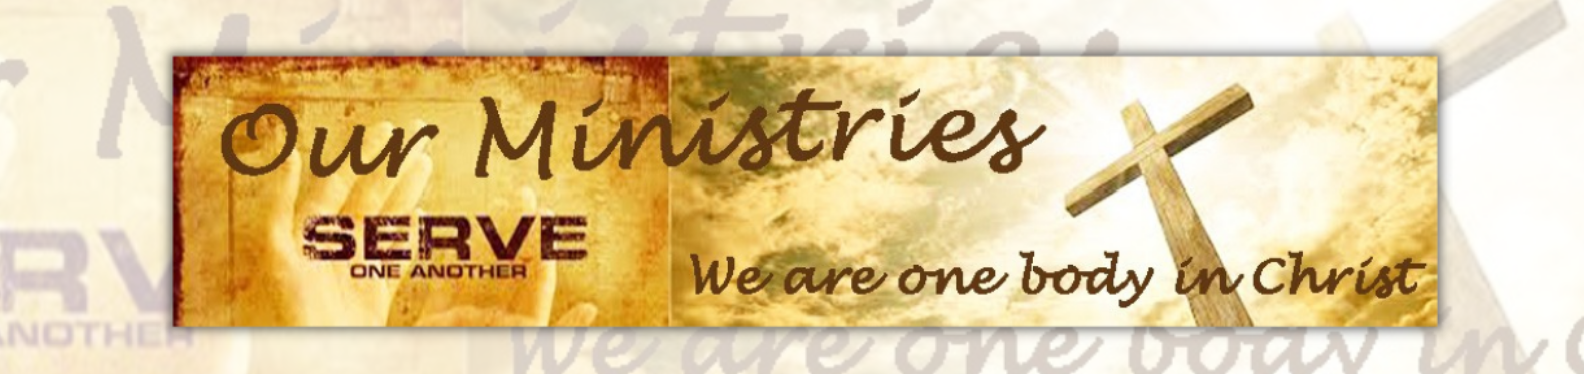 one body in christ-banner